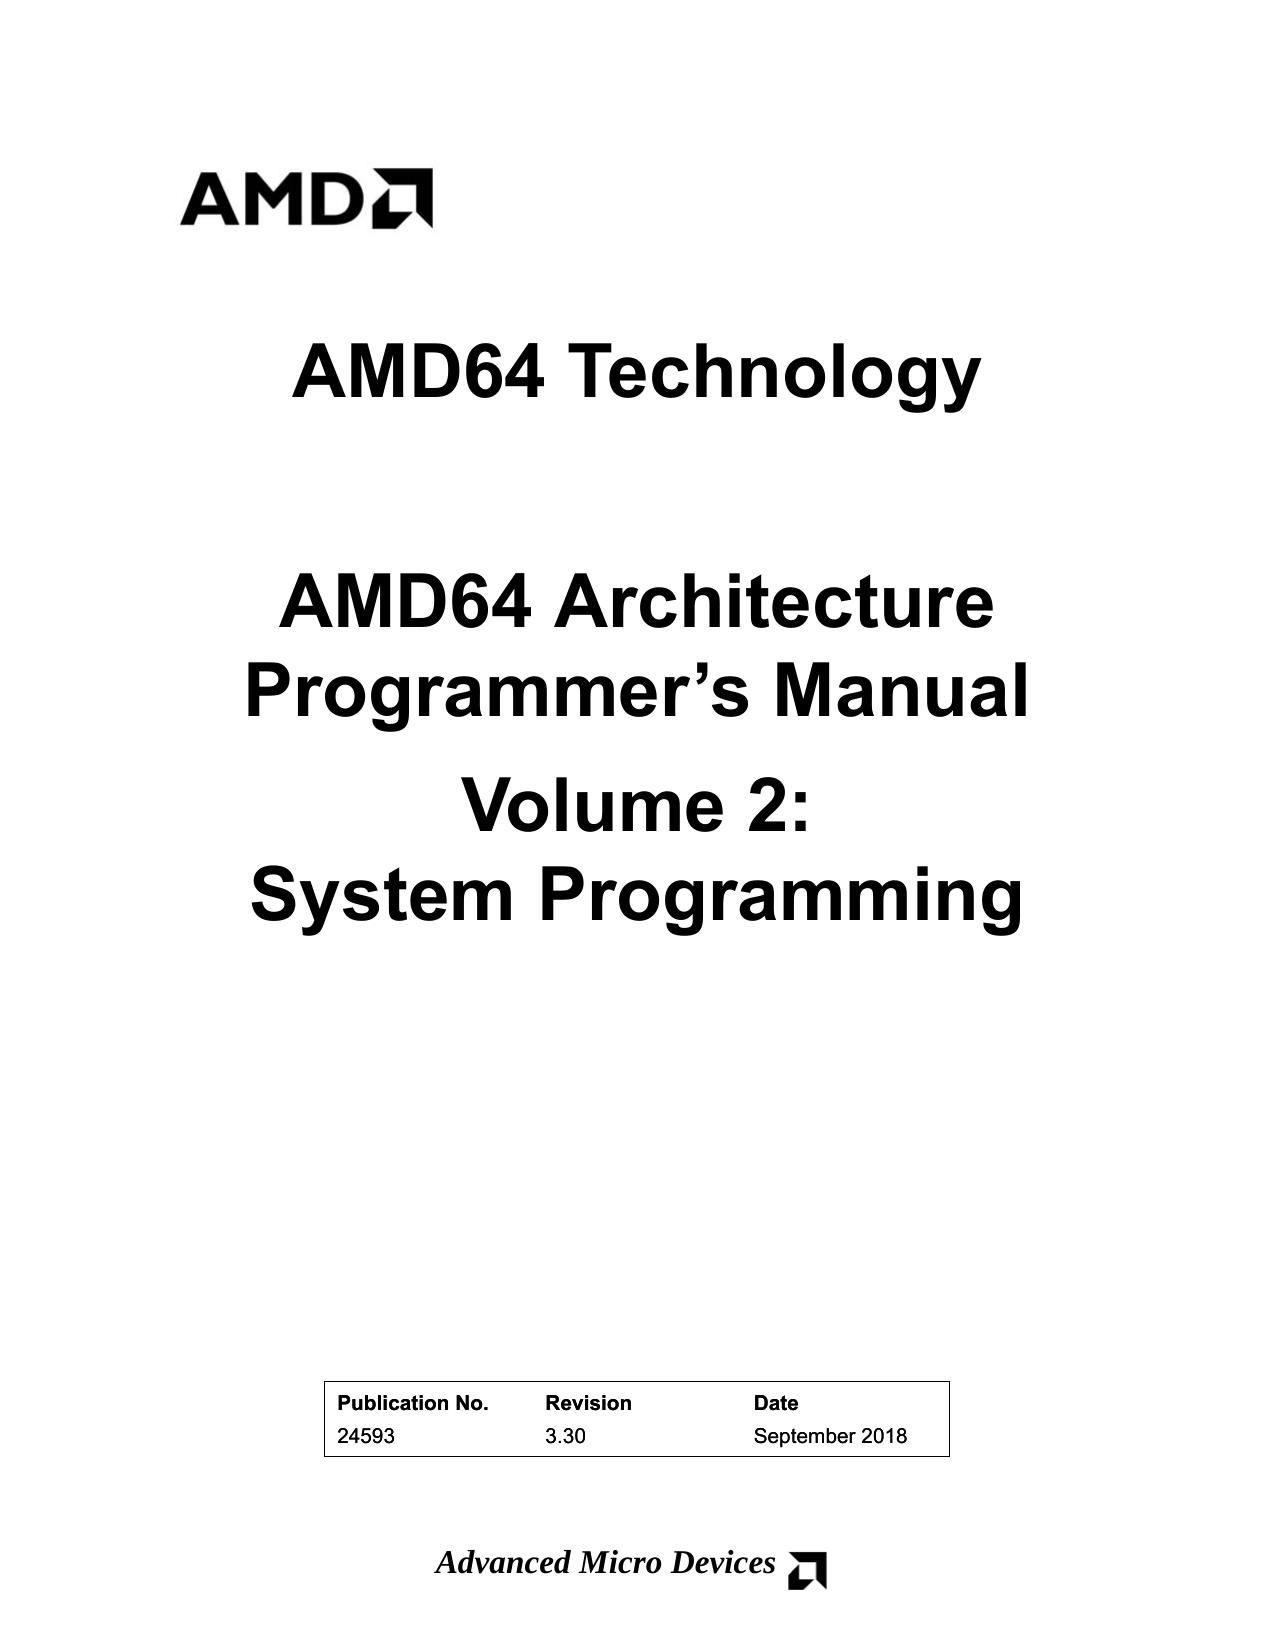 AMD64 Architecture Programmer’s Manual, Volume 2: System Programming